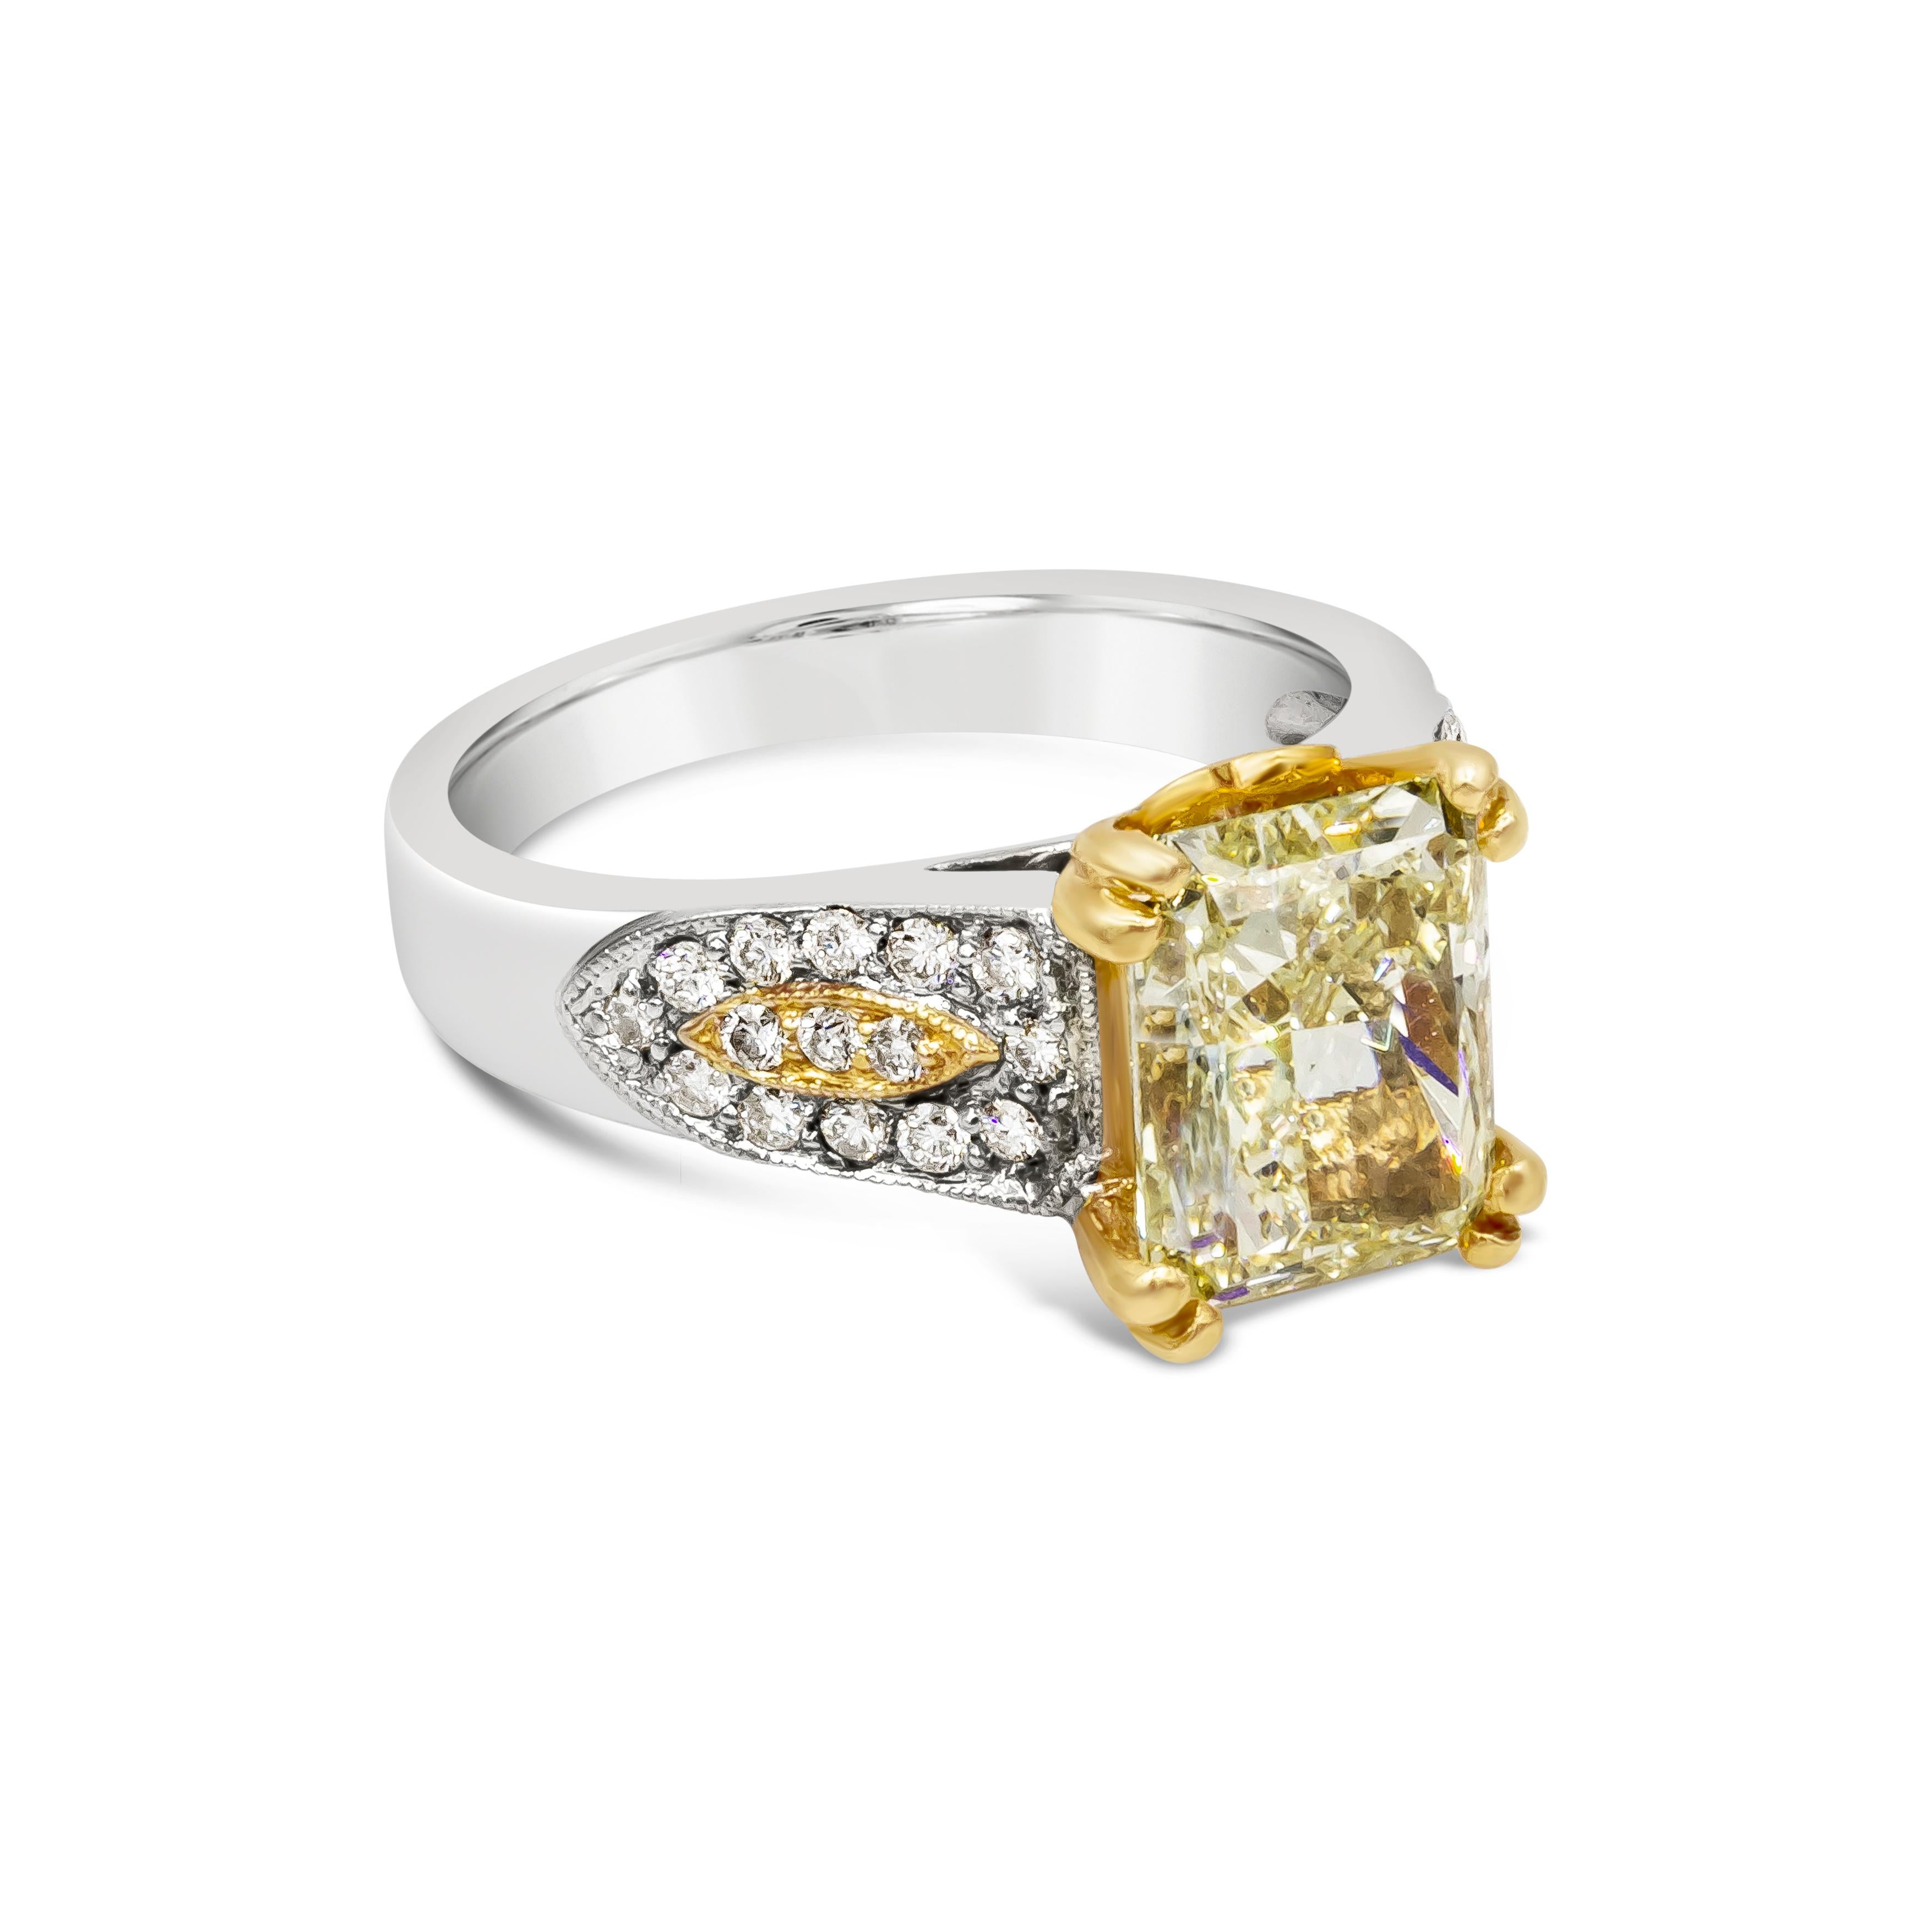 Rare and color rich engagement ring featuring a vibrant 3.87 carats elongated radiant cut diamond certified by GIA as fancy yellow and VS2 in clarity, set in a double claw prongs 18K yellow gold basket. Flanking the center stone are three rows of